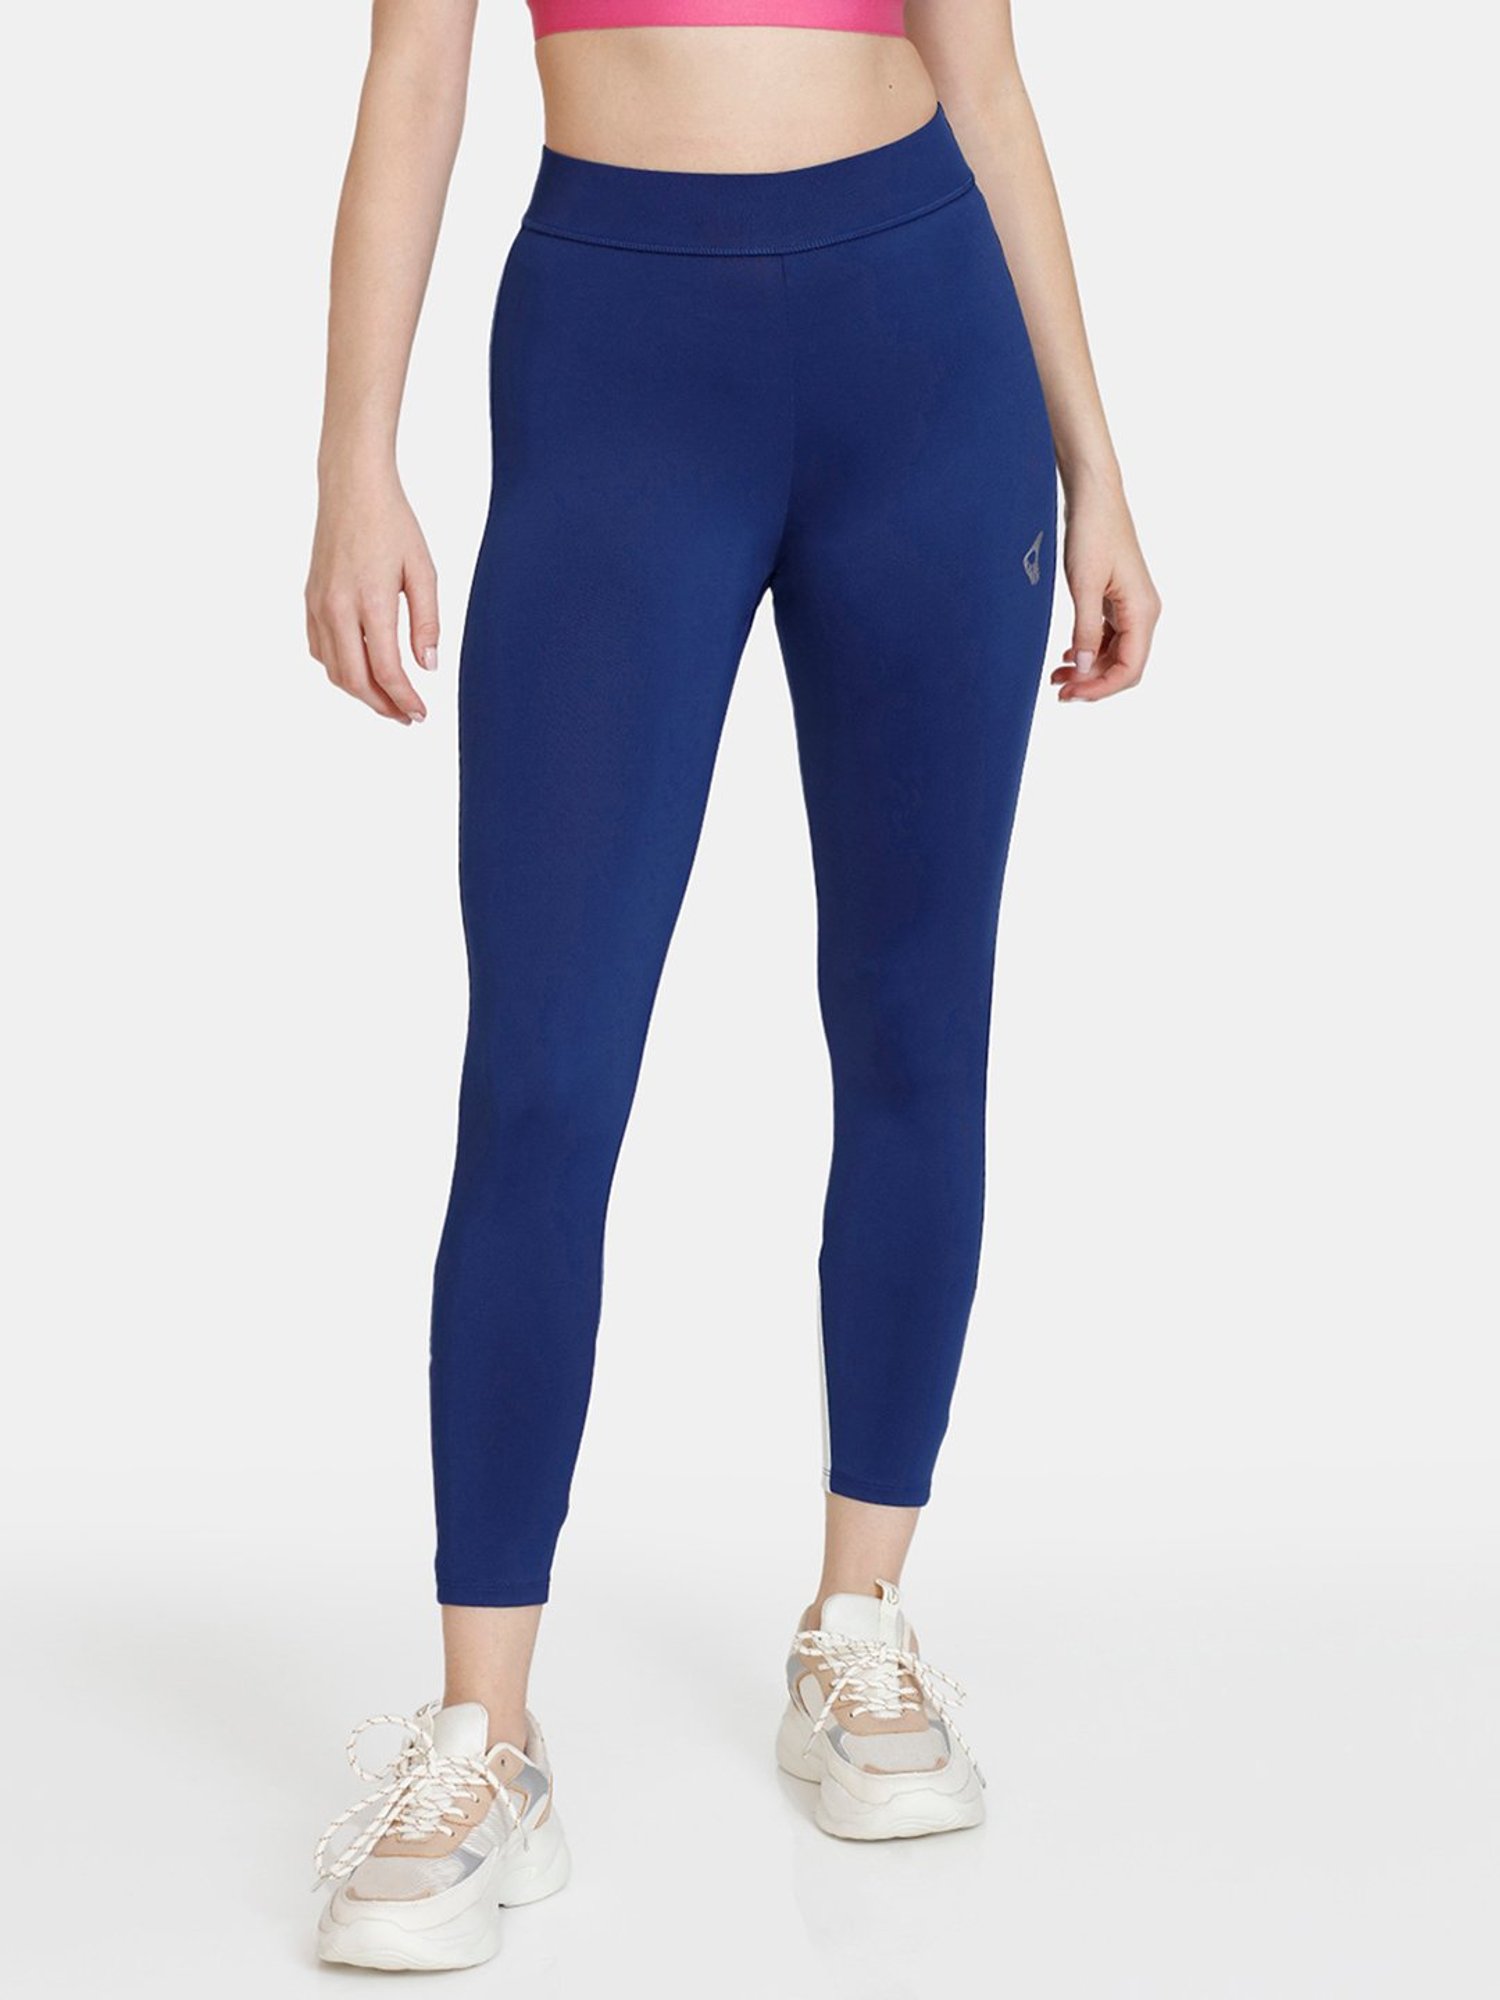 Buy Zelocity by Zivame Blue Rapid Dry Tights for Women's Online